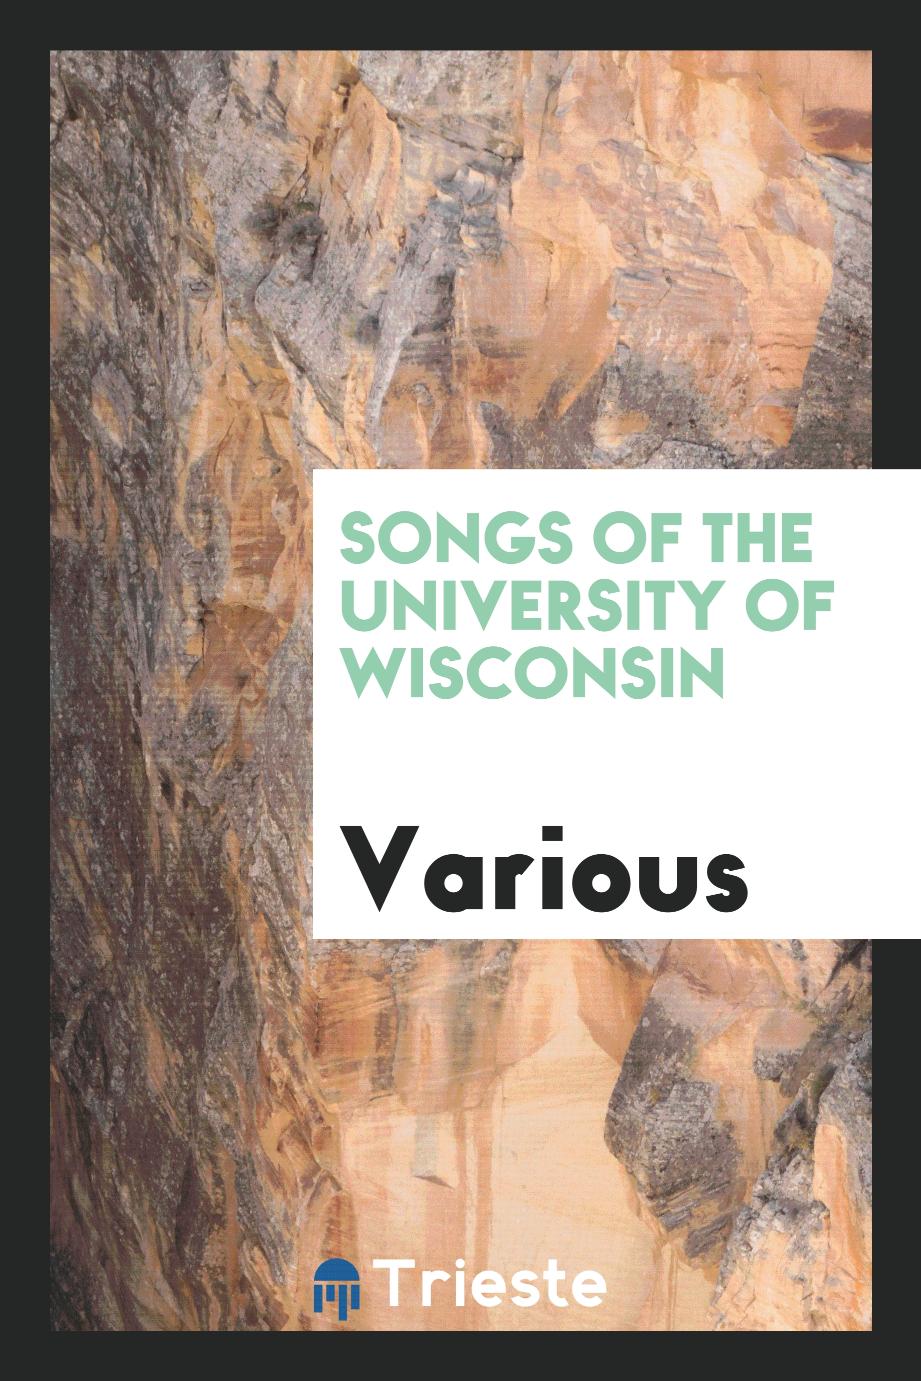 Songs of the University of Wisconsin